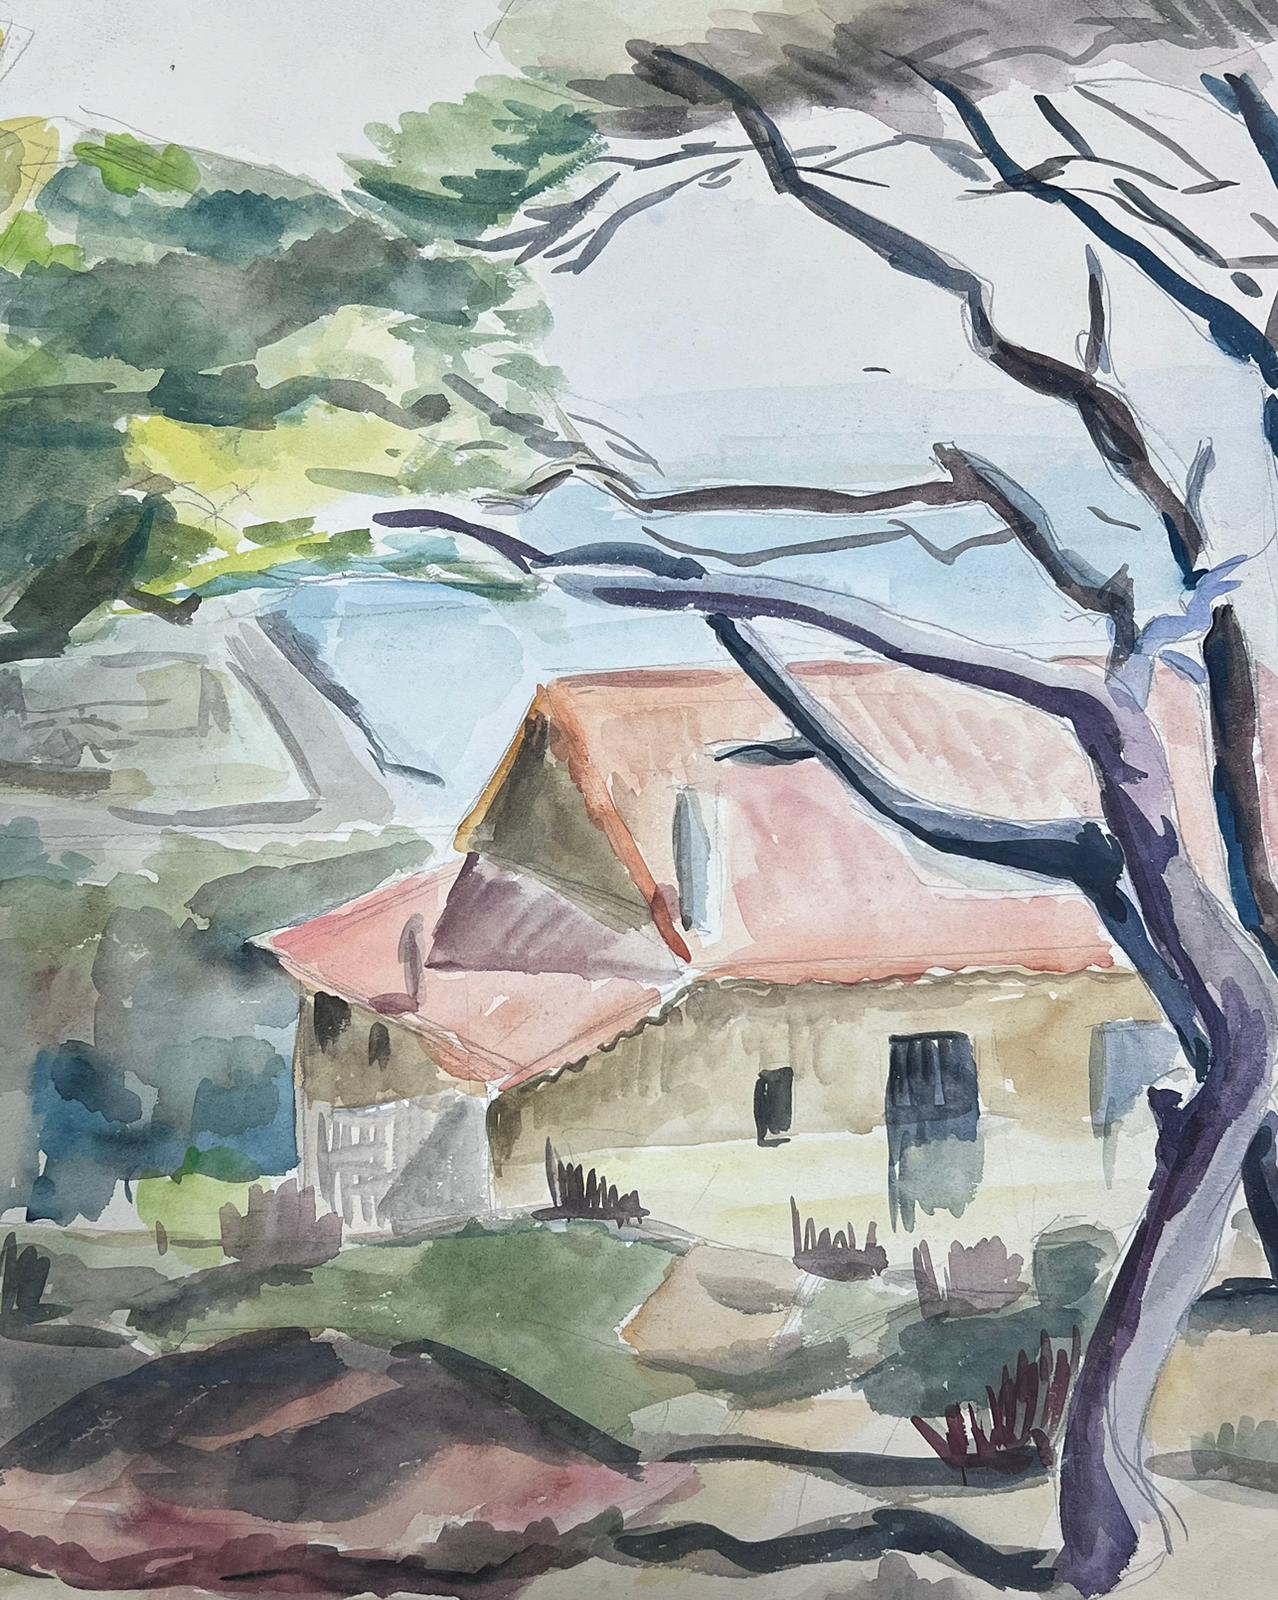 The Coastal Cottage
by Guy Nicod
(French 1923 - 2021)
stamped verso
watercolour on artist paper, unframed
painting : 15 x 16.5 inches
provenance: artists estate, France
condition: very good and sound condition